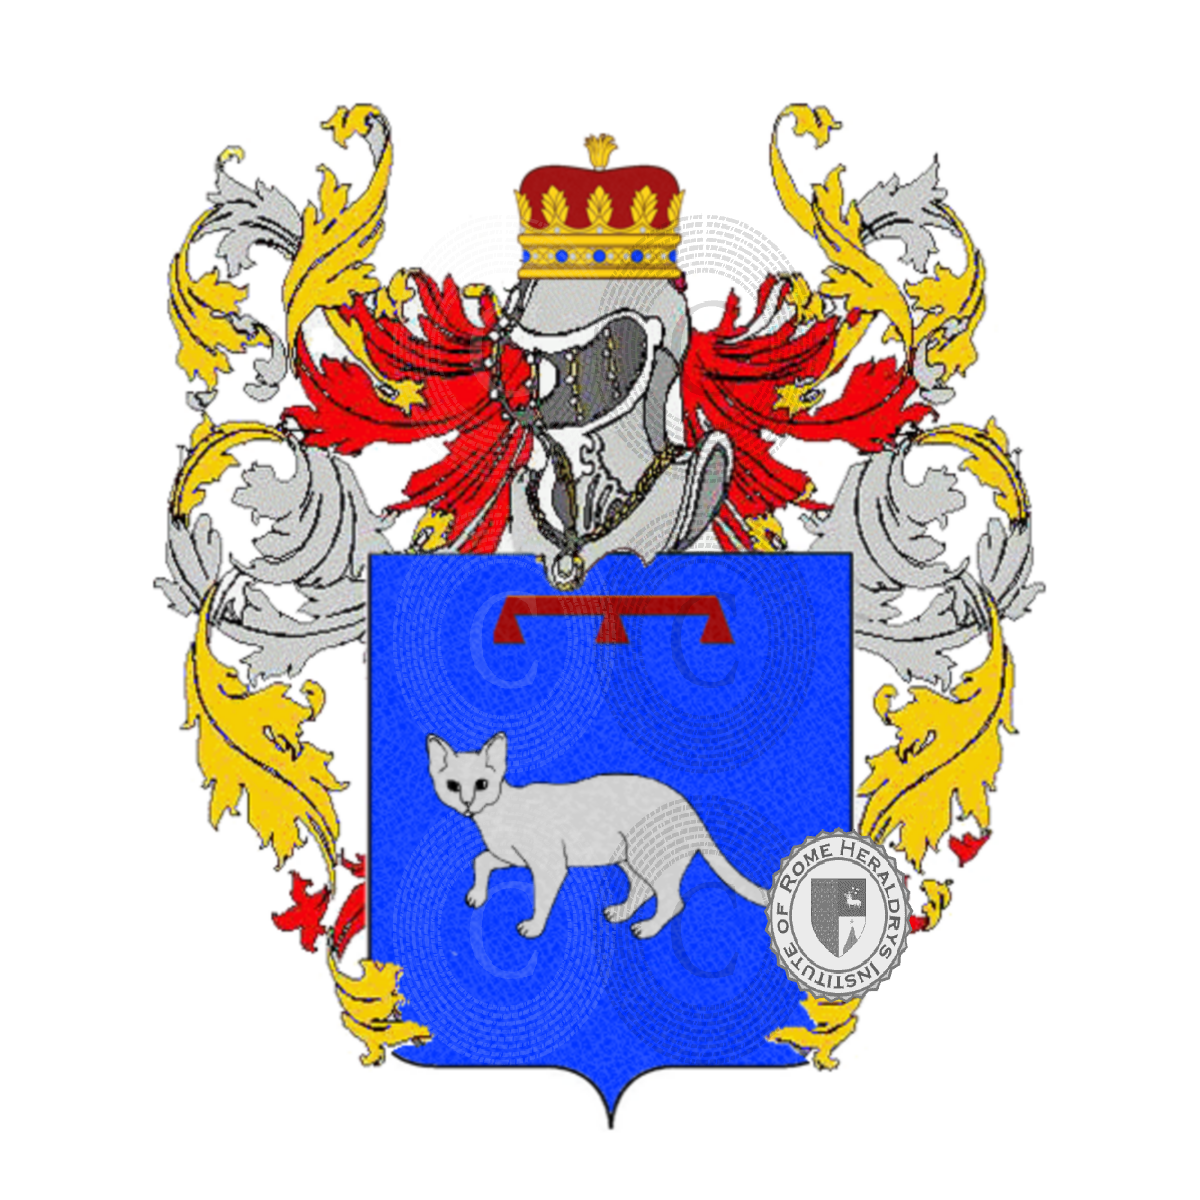 Coat of arms of familygatta    